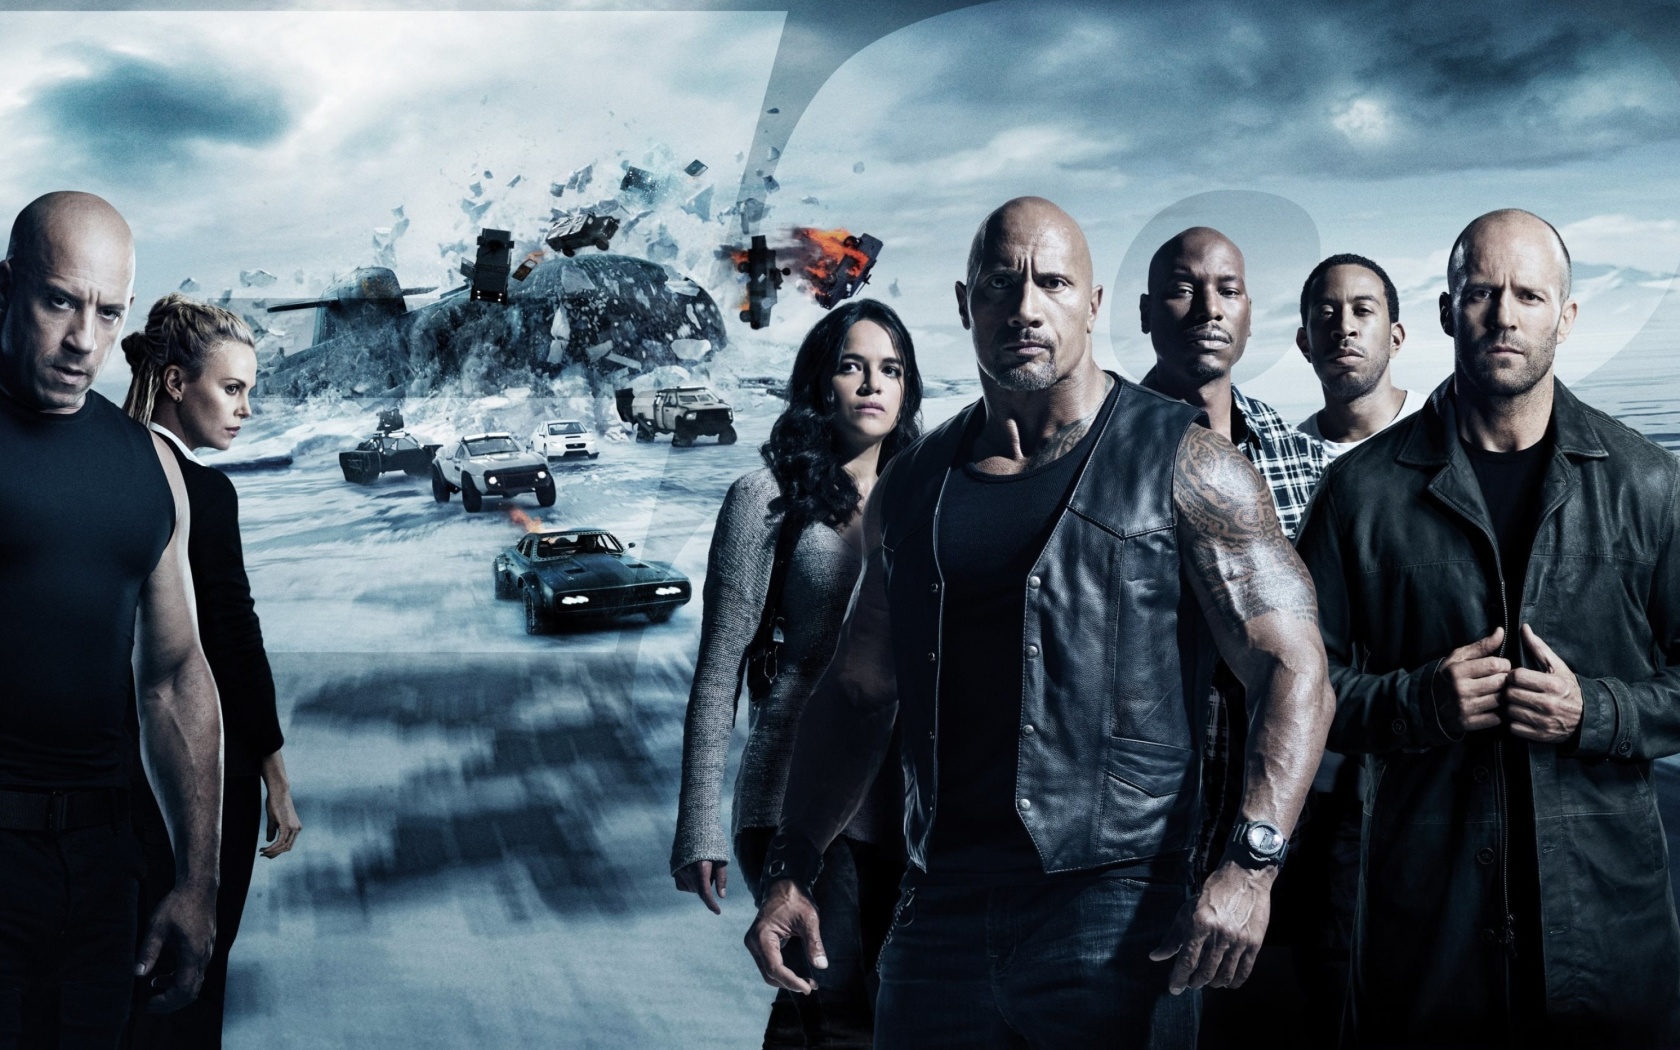 The Fate of the Furious with Vin Diesel, Dwayne Johnson, Charlize Theron screenshot #1 1680x1050